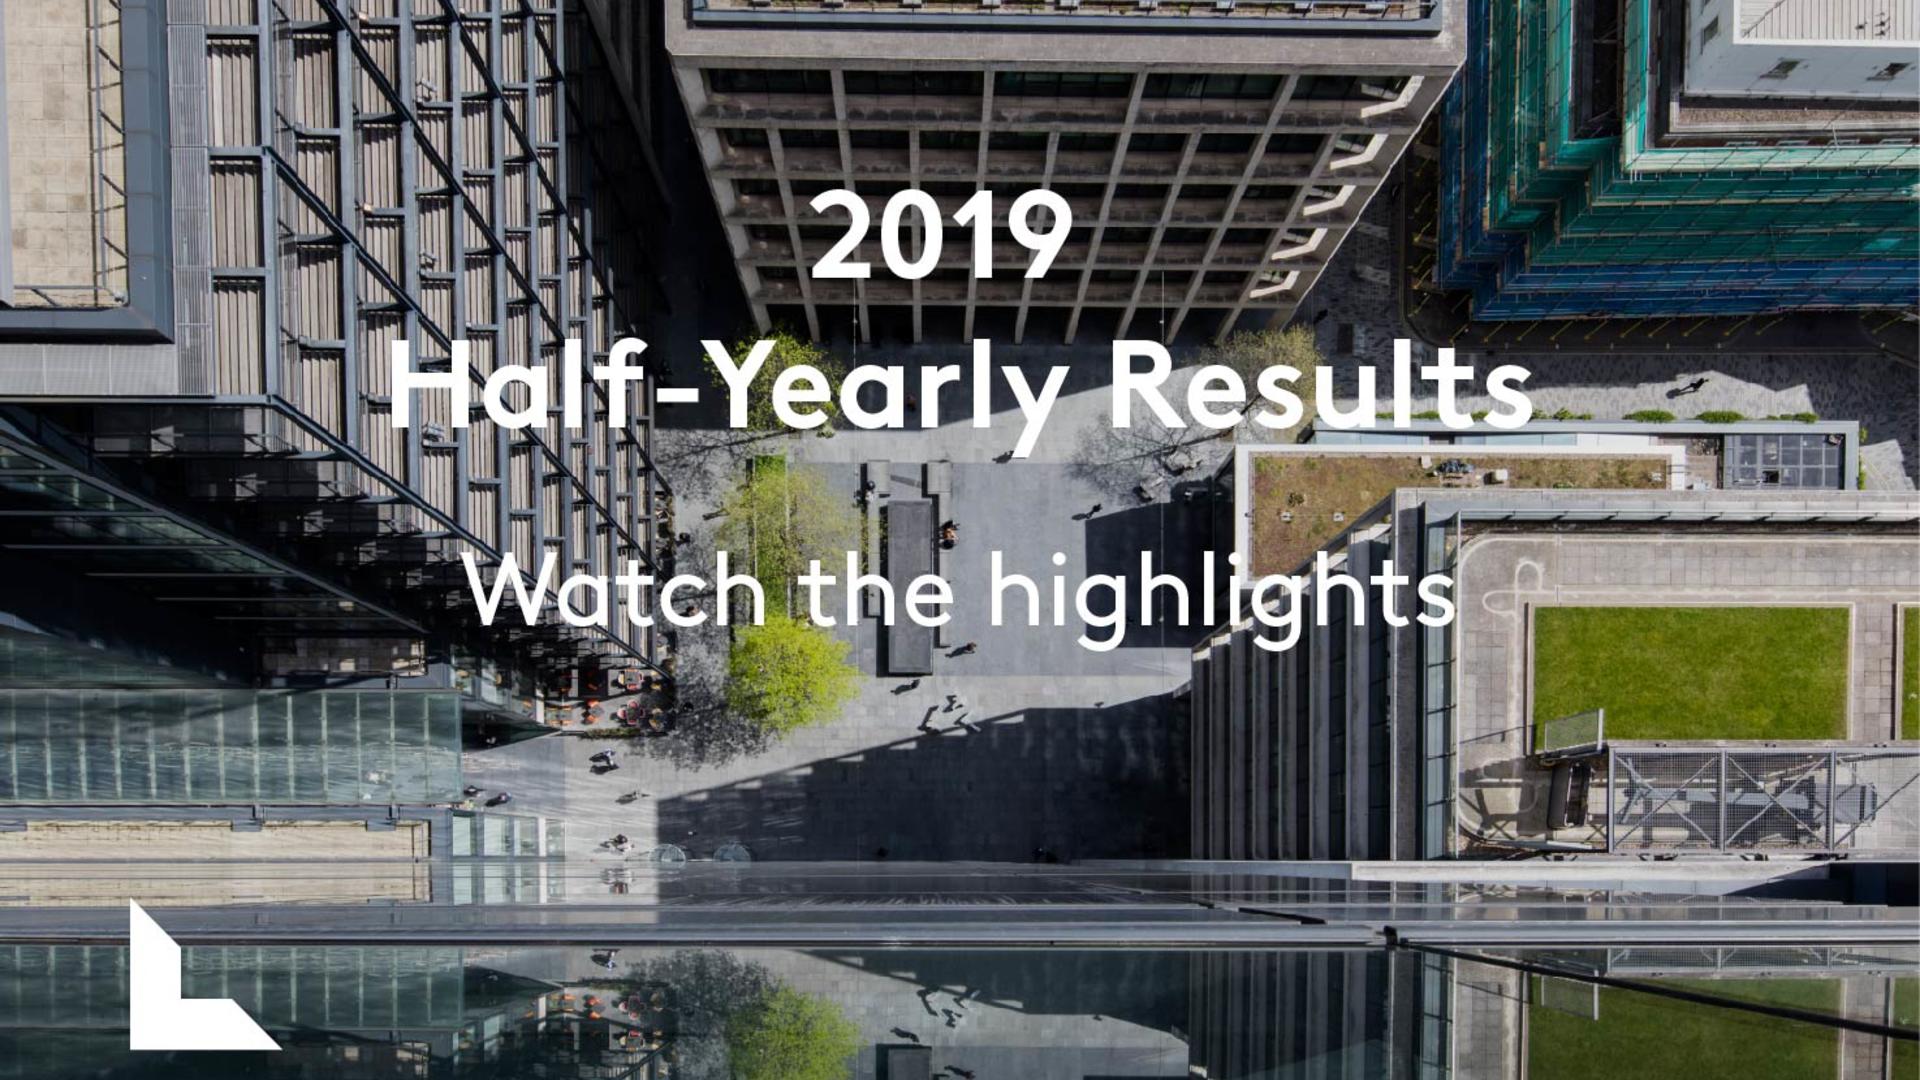 2019 Half-yearly results